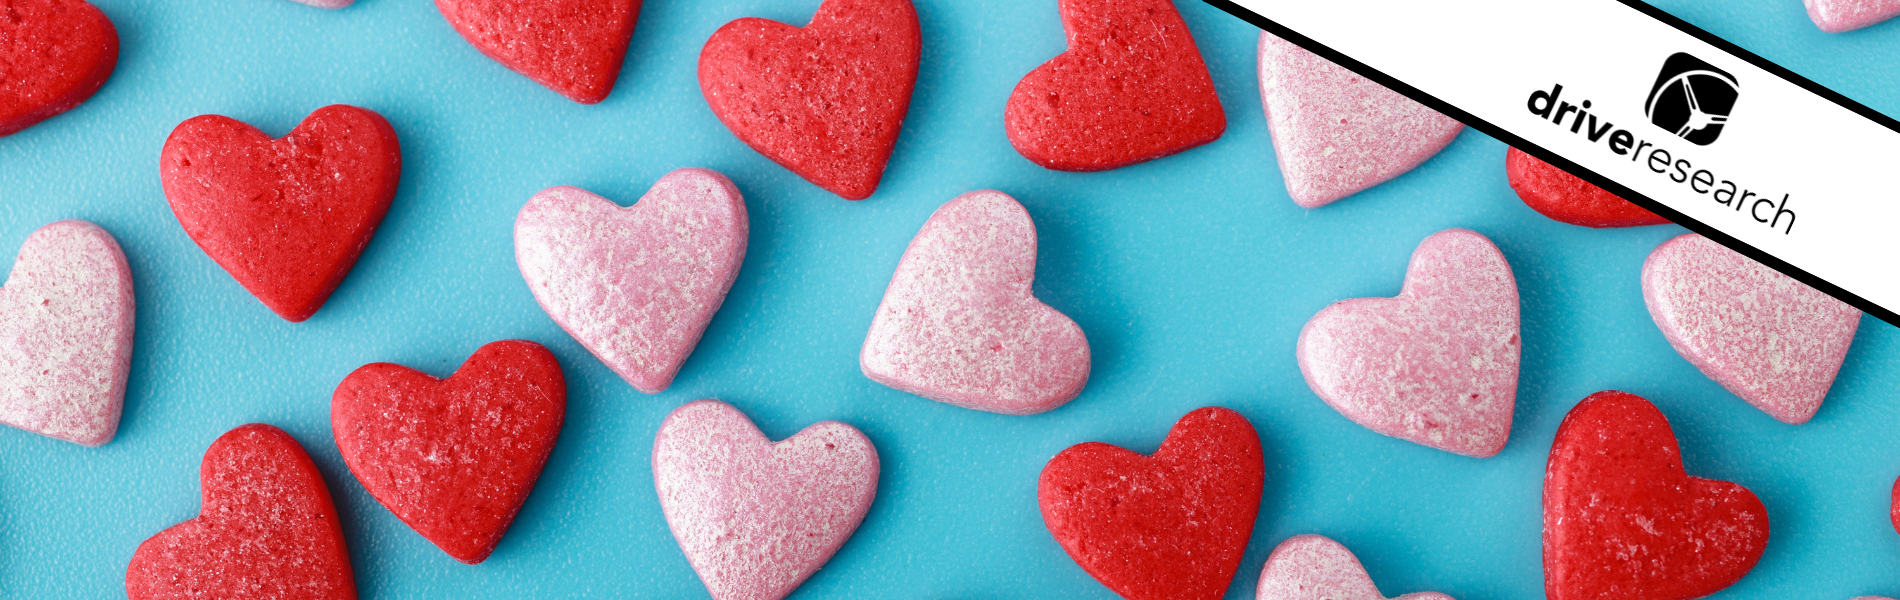 https://www.driveresearch.com/media/5084/red-and-pink-candy-hearts.png